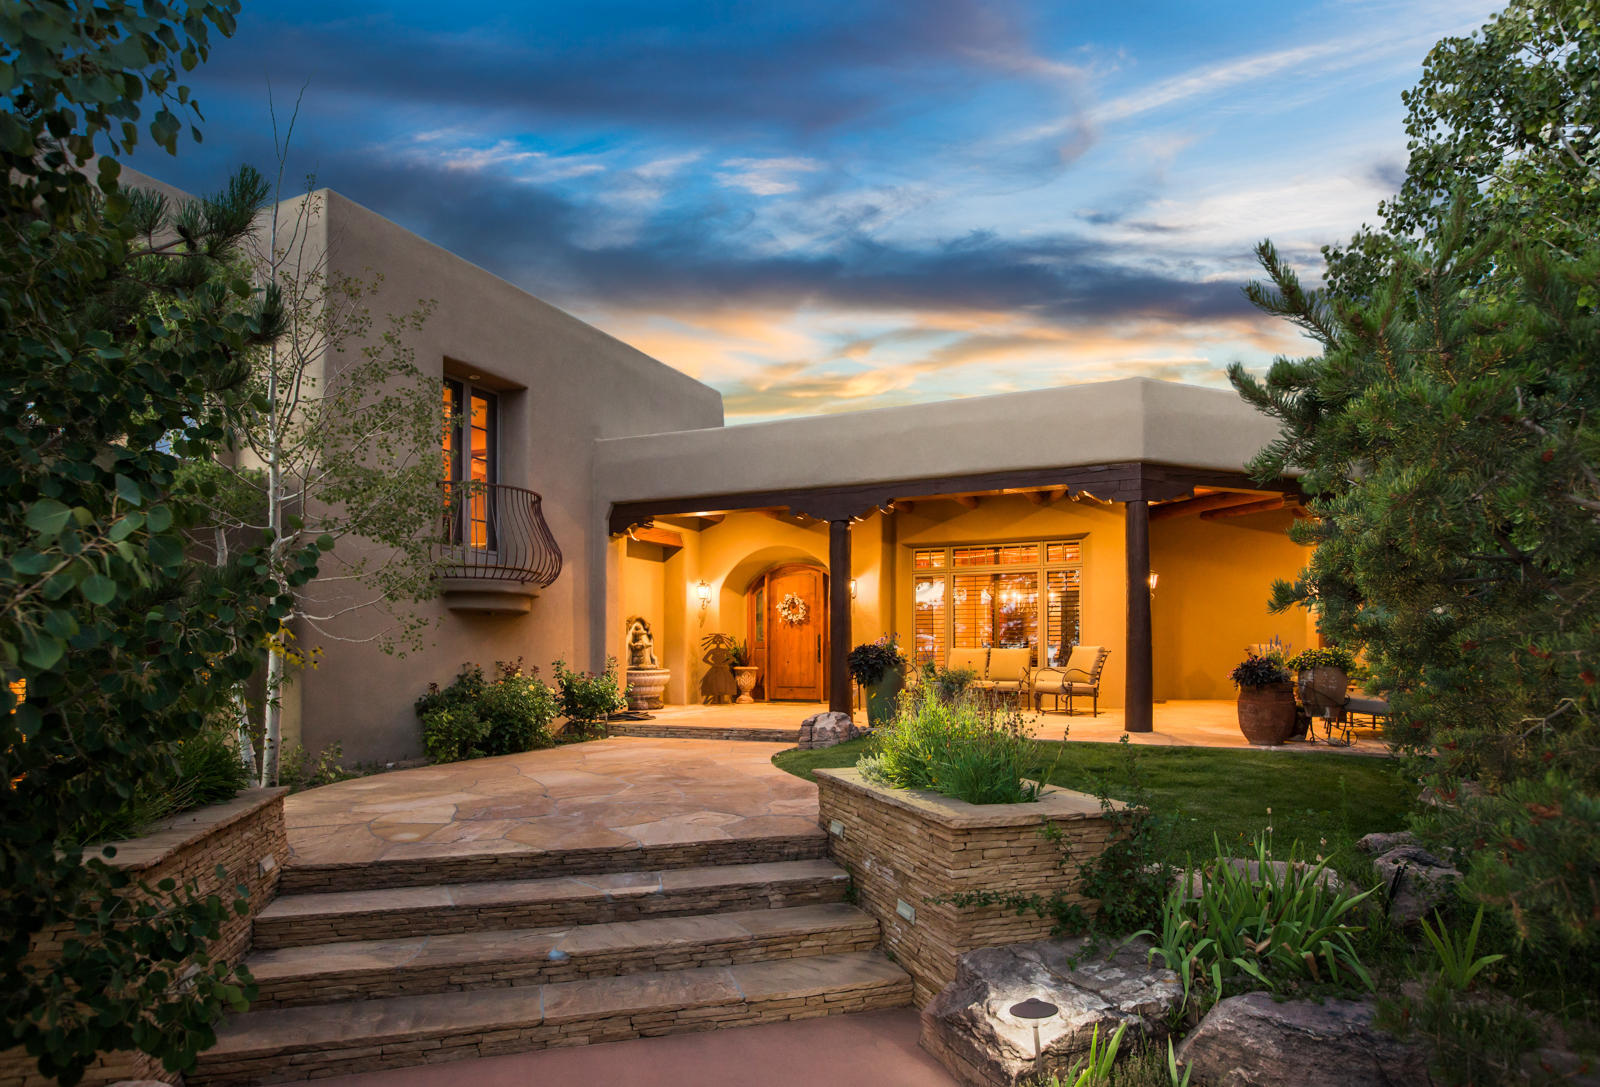 new homes for sale in albuquerque nm